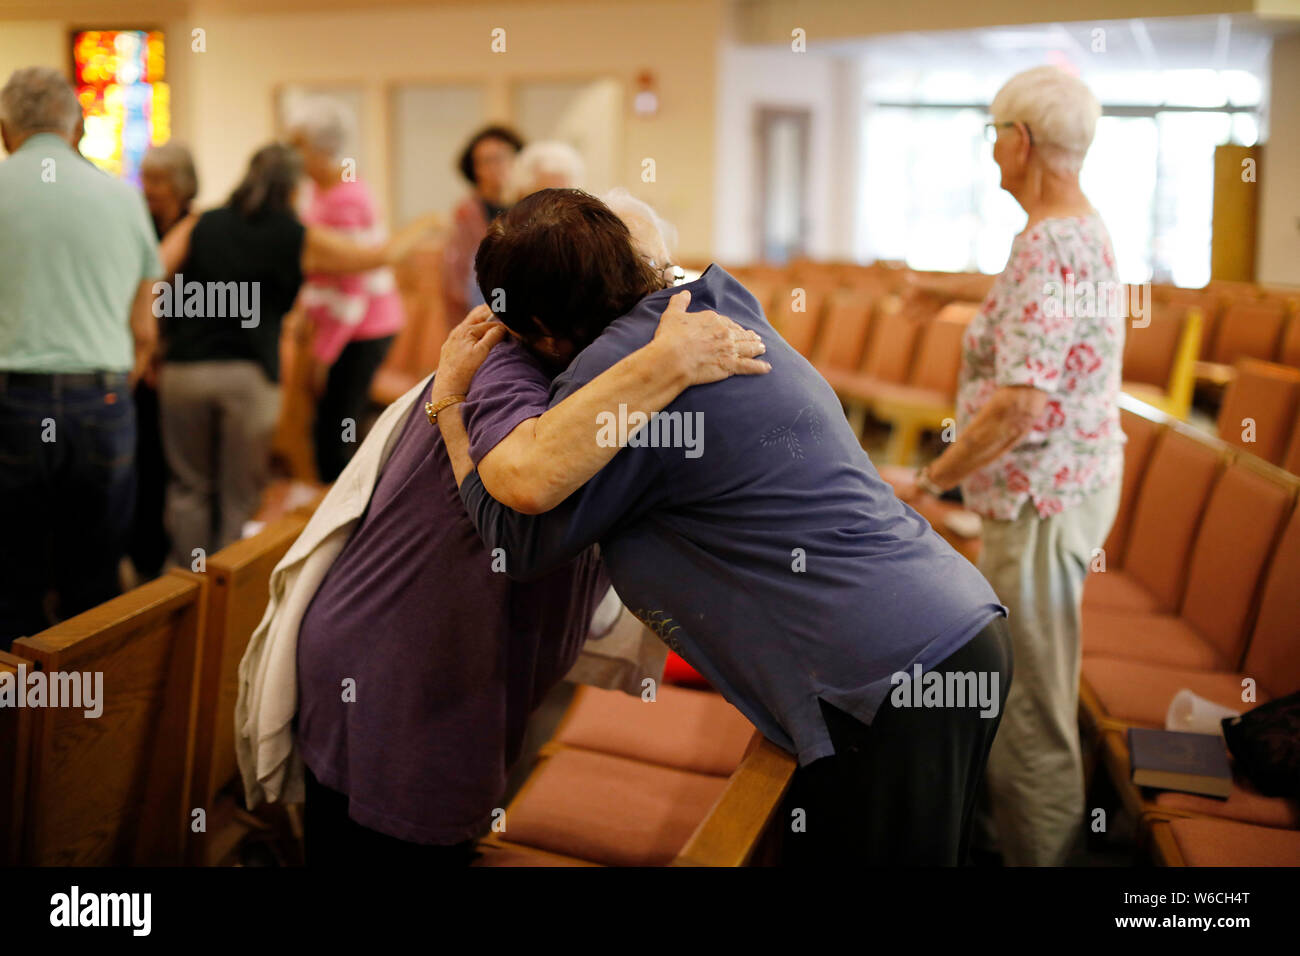 (190801) -- BEIJING, Aug. 1, 2019 (Xinhua) -- People hug each other as they mourn for the victims of a garlic festival shooting incident in San Jose, California, the United States, July 30, 2019. A six-year-old boy and a 13-year-old girl were among the three victims killed in a shooting at an annual garlic festival held in Gilroy city, Northern California, Gilroy Police Chief Scot Smithee said Monday. The police chief also updated the number of total injuries to 12 who survived the shooting at the annual Gilroy Garlic Festival. The injuries were previously put at 15 on Sunday. (Photo by Li Stock Photo